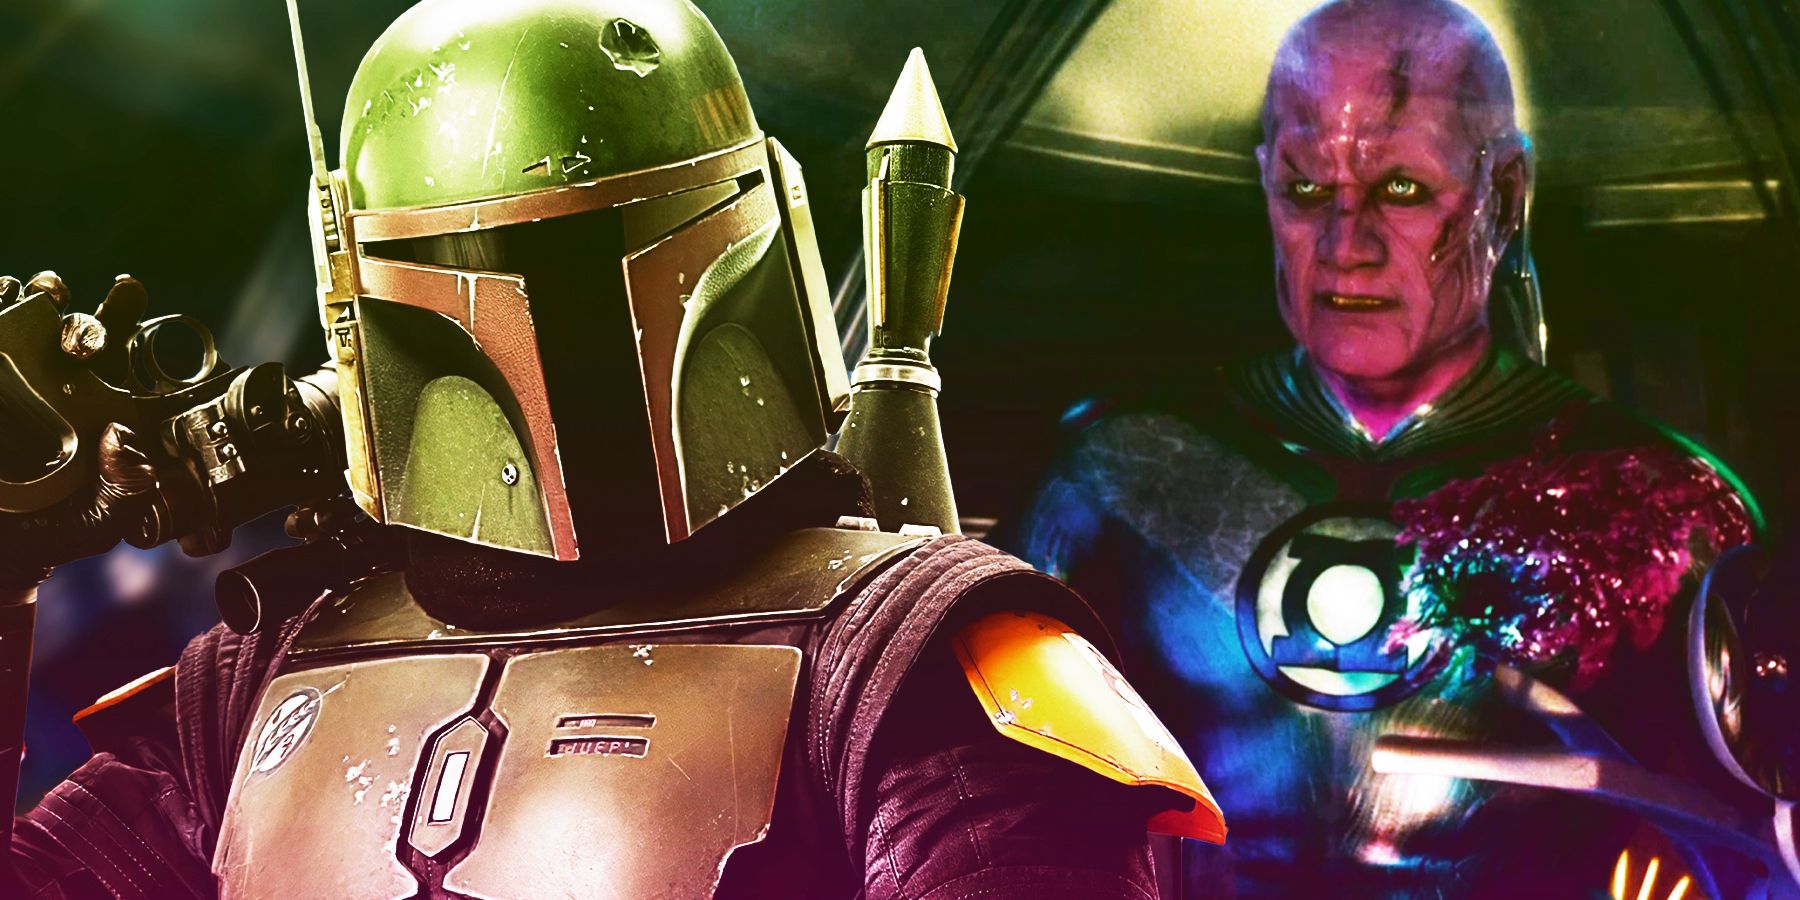 Boba Fett from Star Wars and Abin Sur from Green Lantern